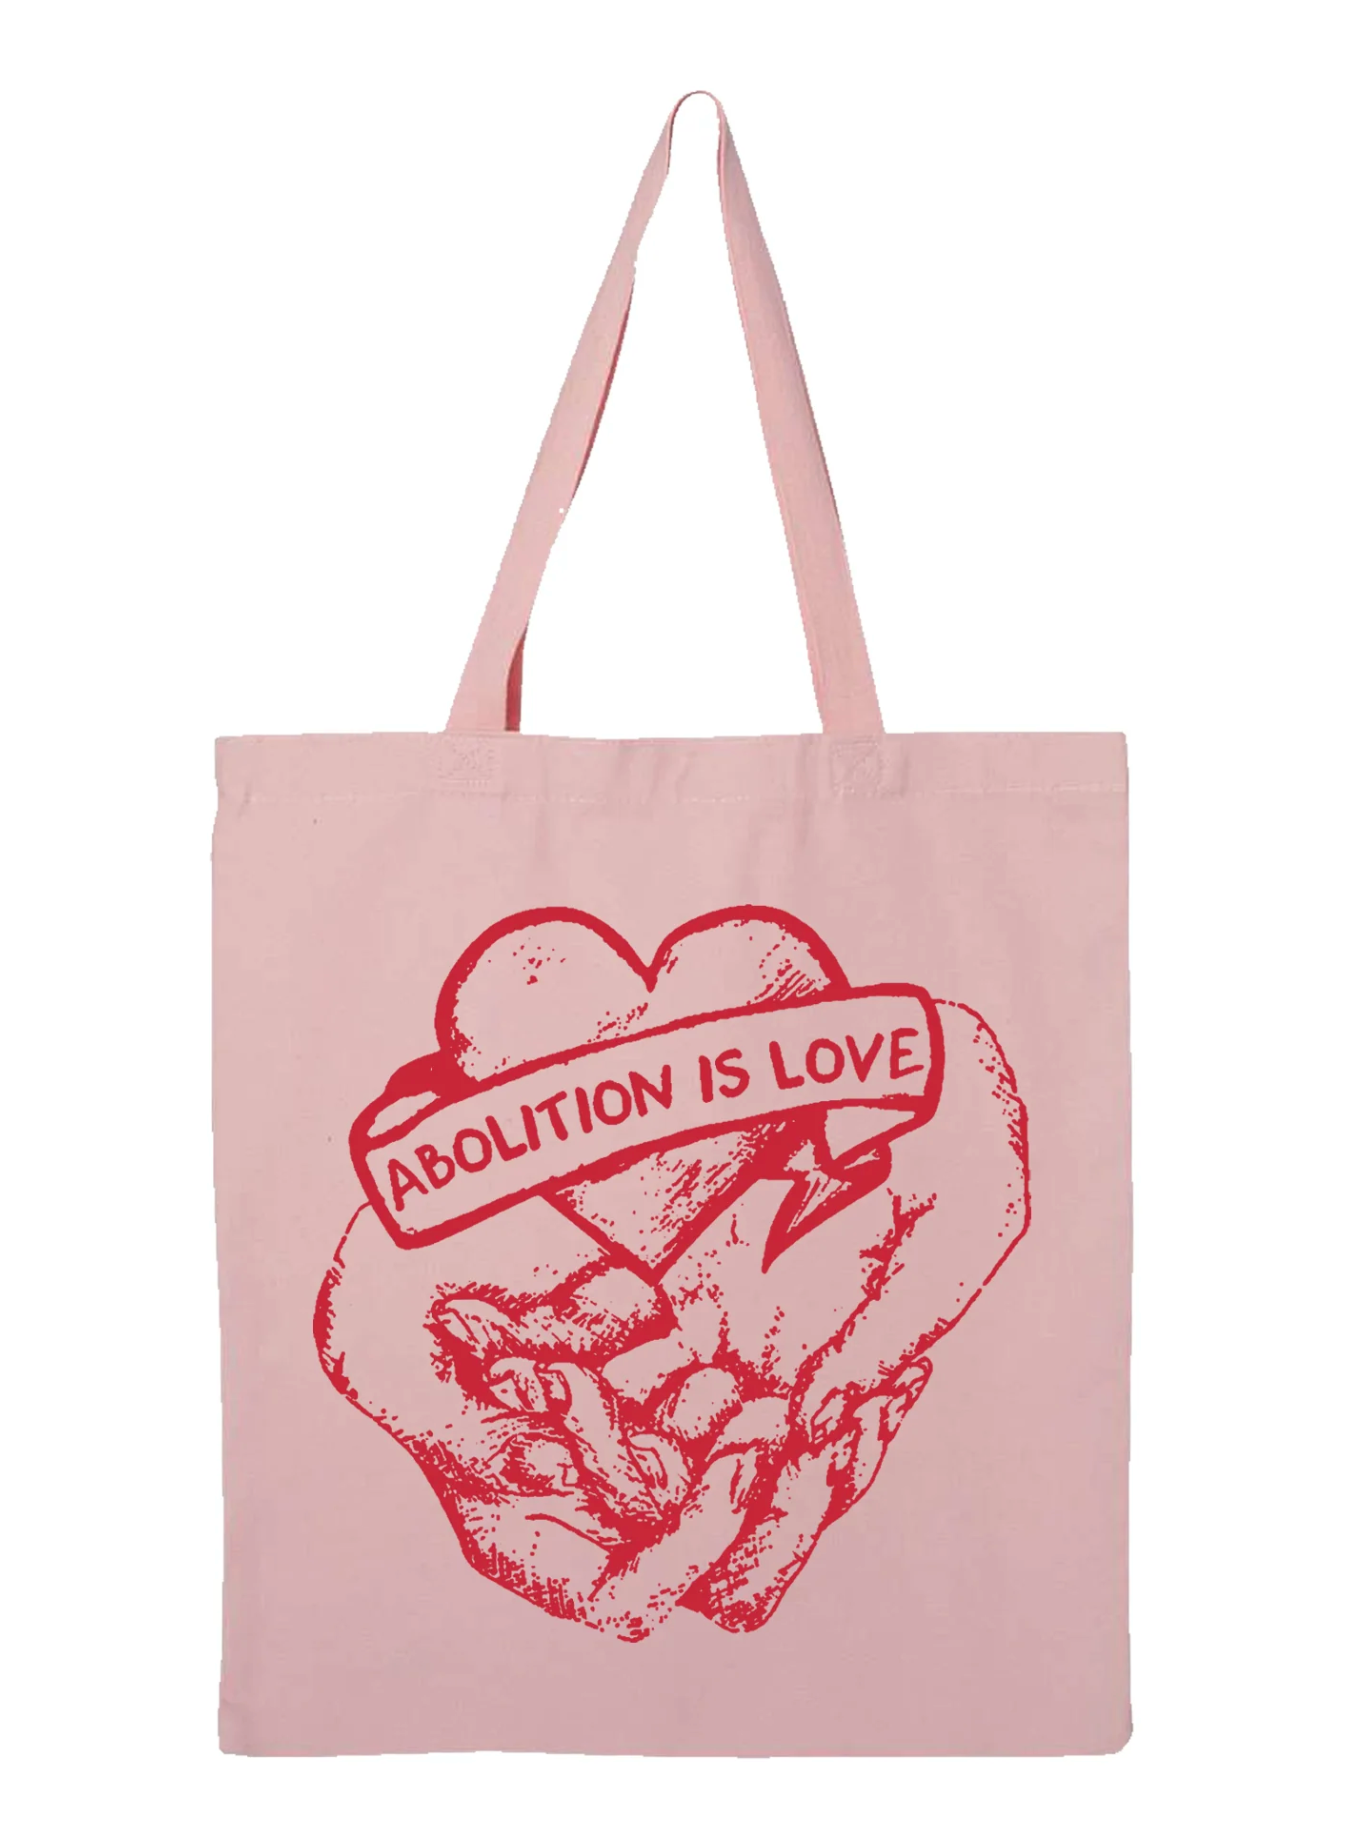 Abolition is Love Tote Bag